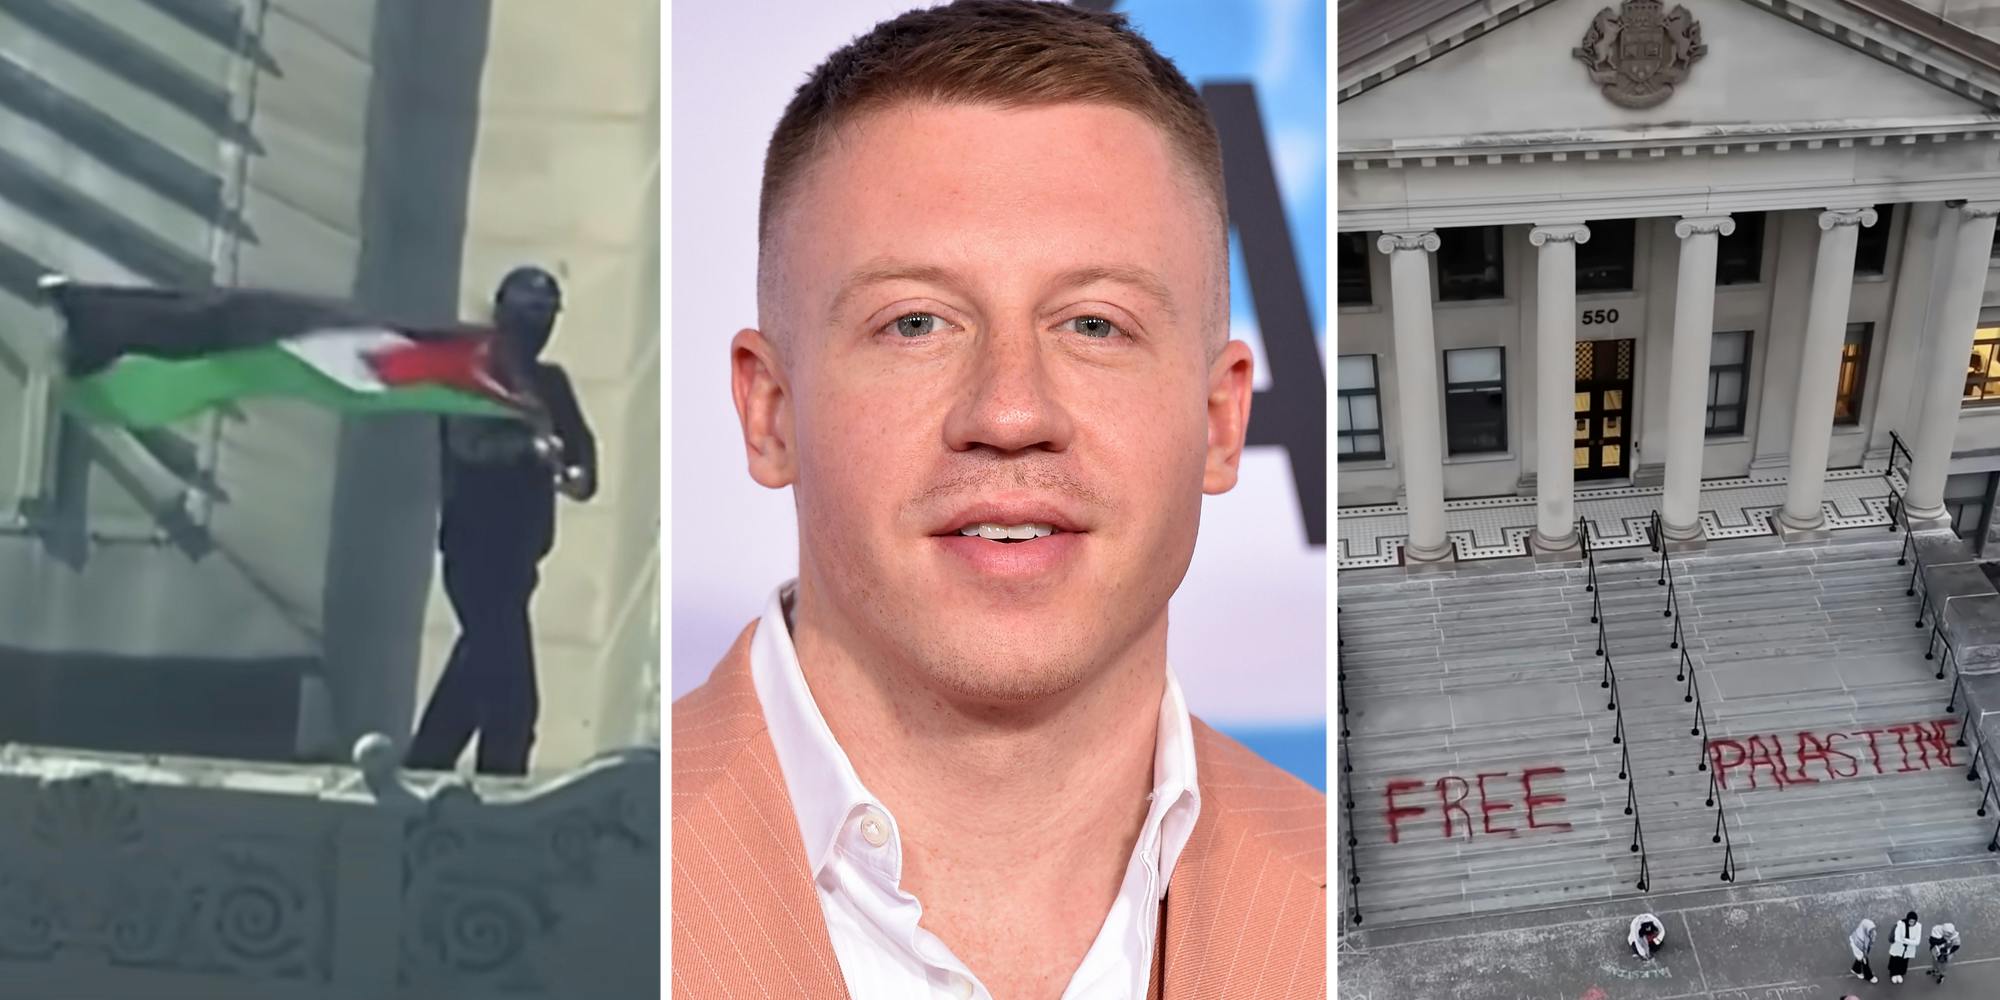 Person on roof waving Palestine flag(l), Macklemore(c), Building with "Free Palestine" spray painted on steps(r)